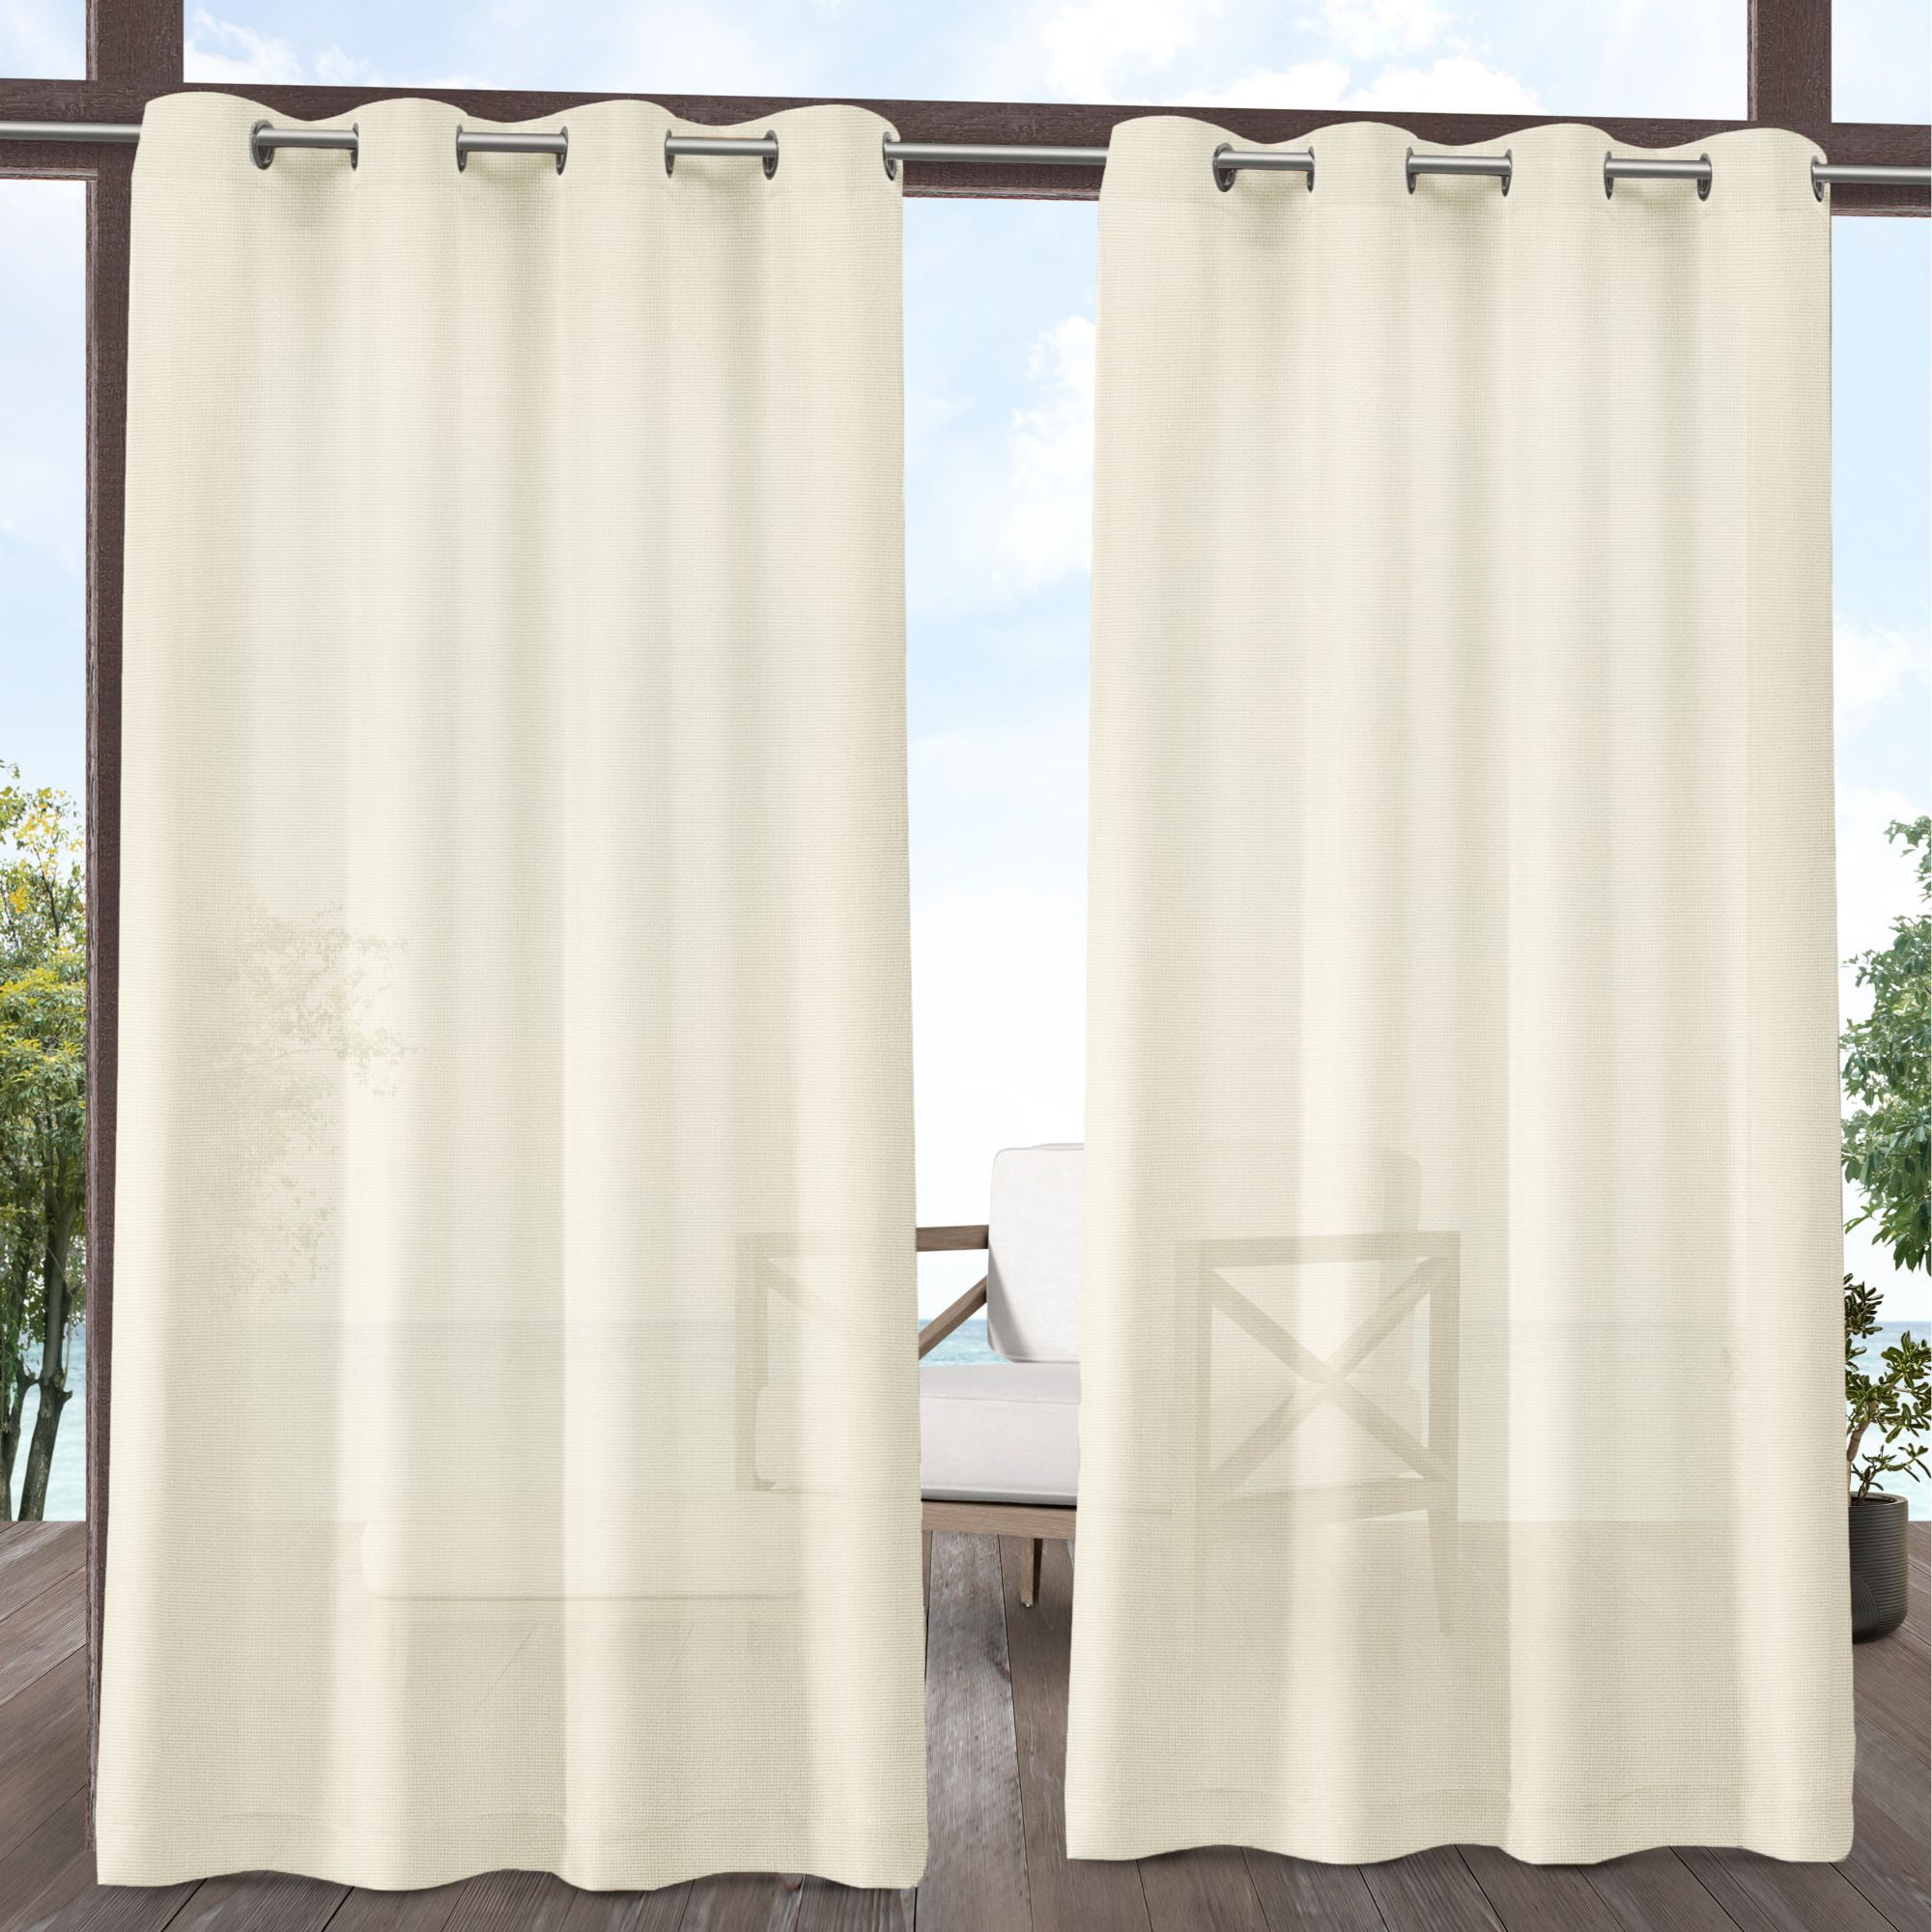 2X Thermal Outdoor Waterproof Grommet Blackout Window Porch Curtain Panel 50x84" 